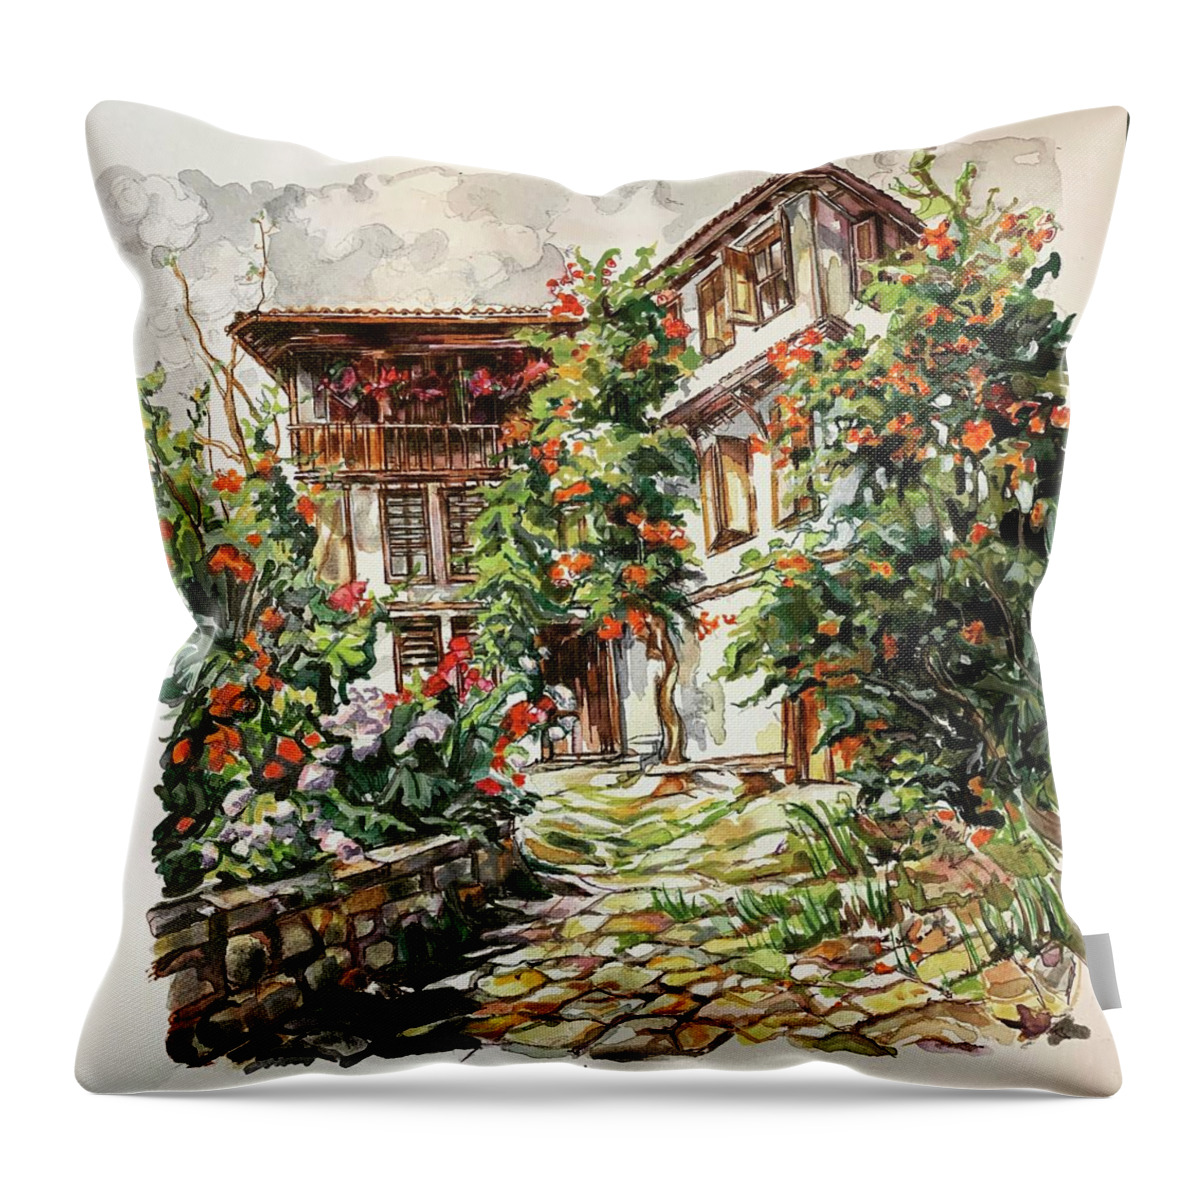 Outside Throw Pillow featuring the painting Homestead by Try Cheatham